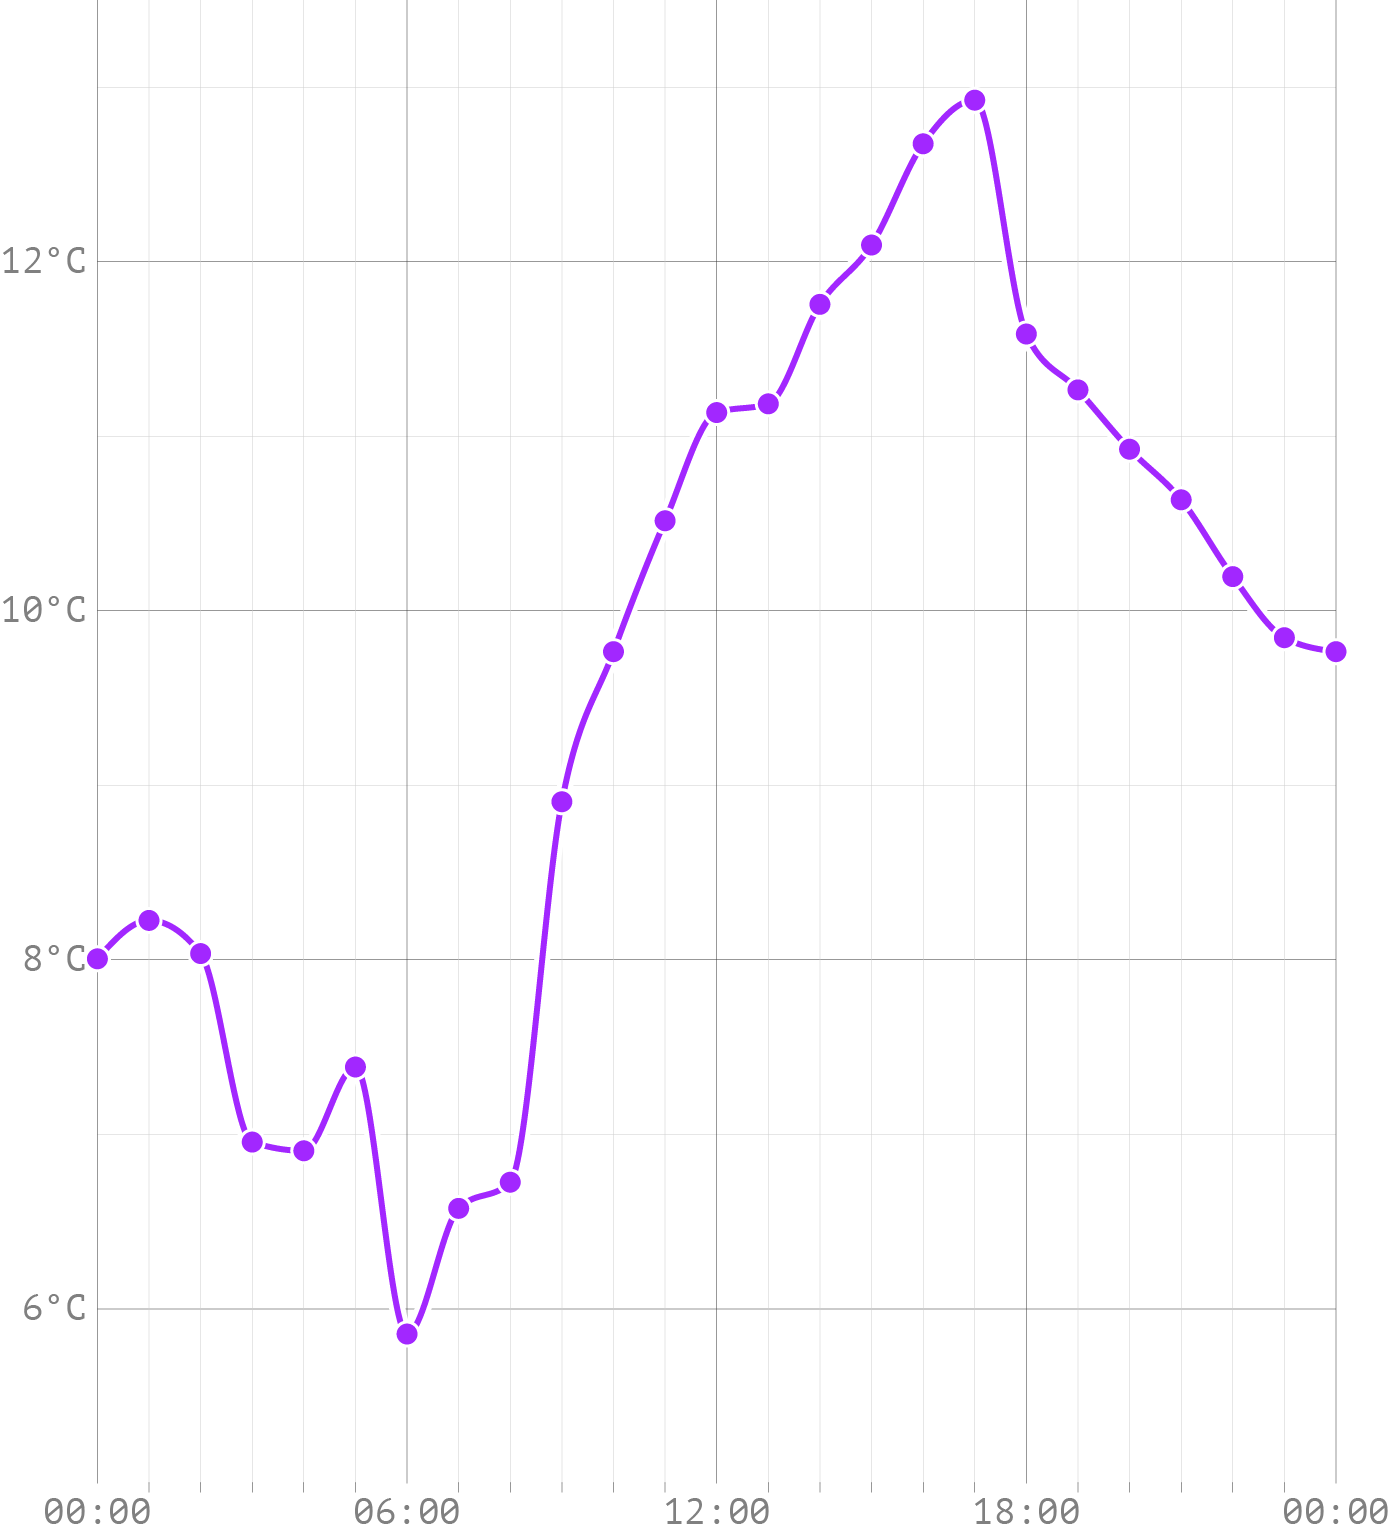 The same chart as above, but with a curved line interpolation